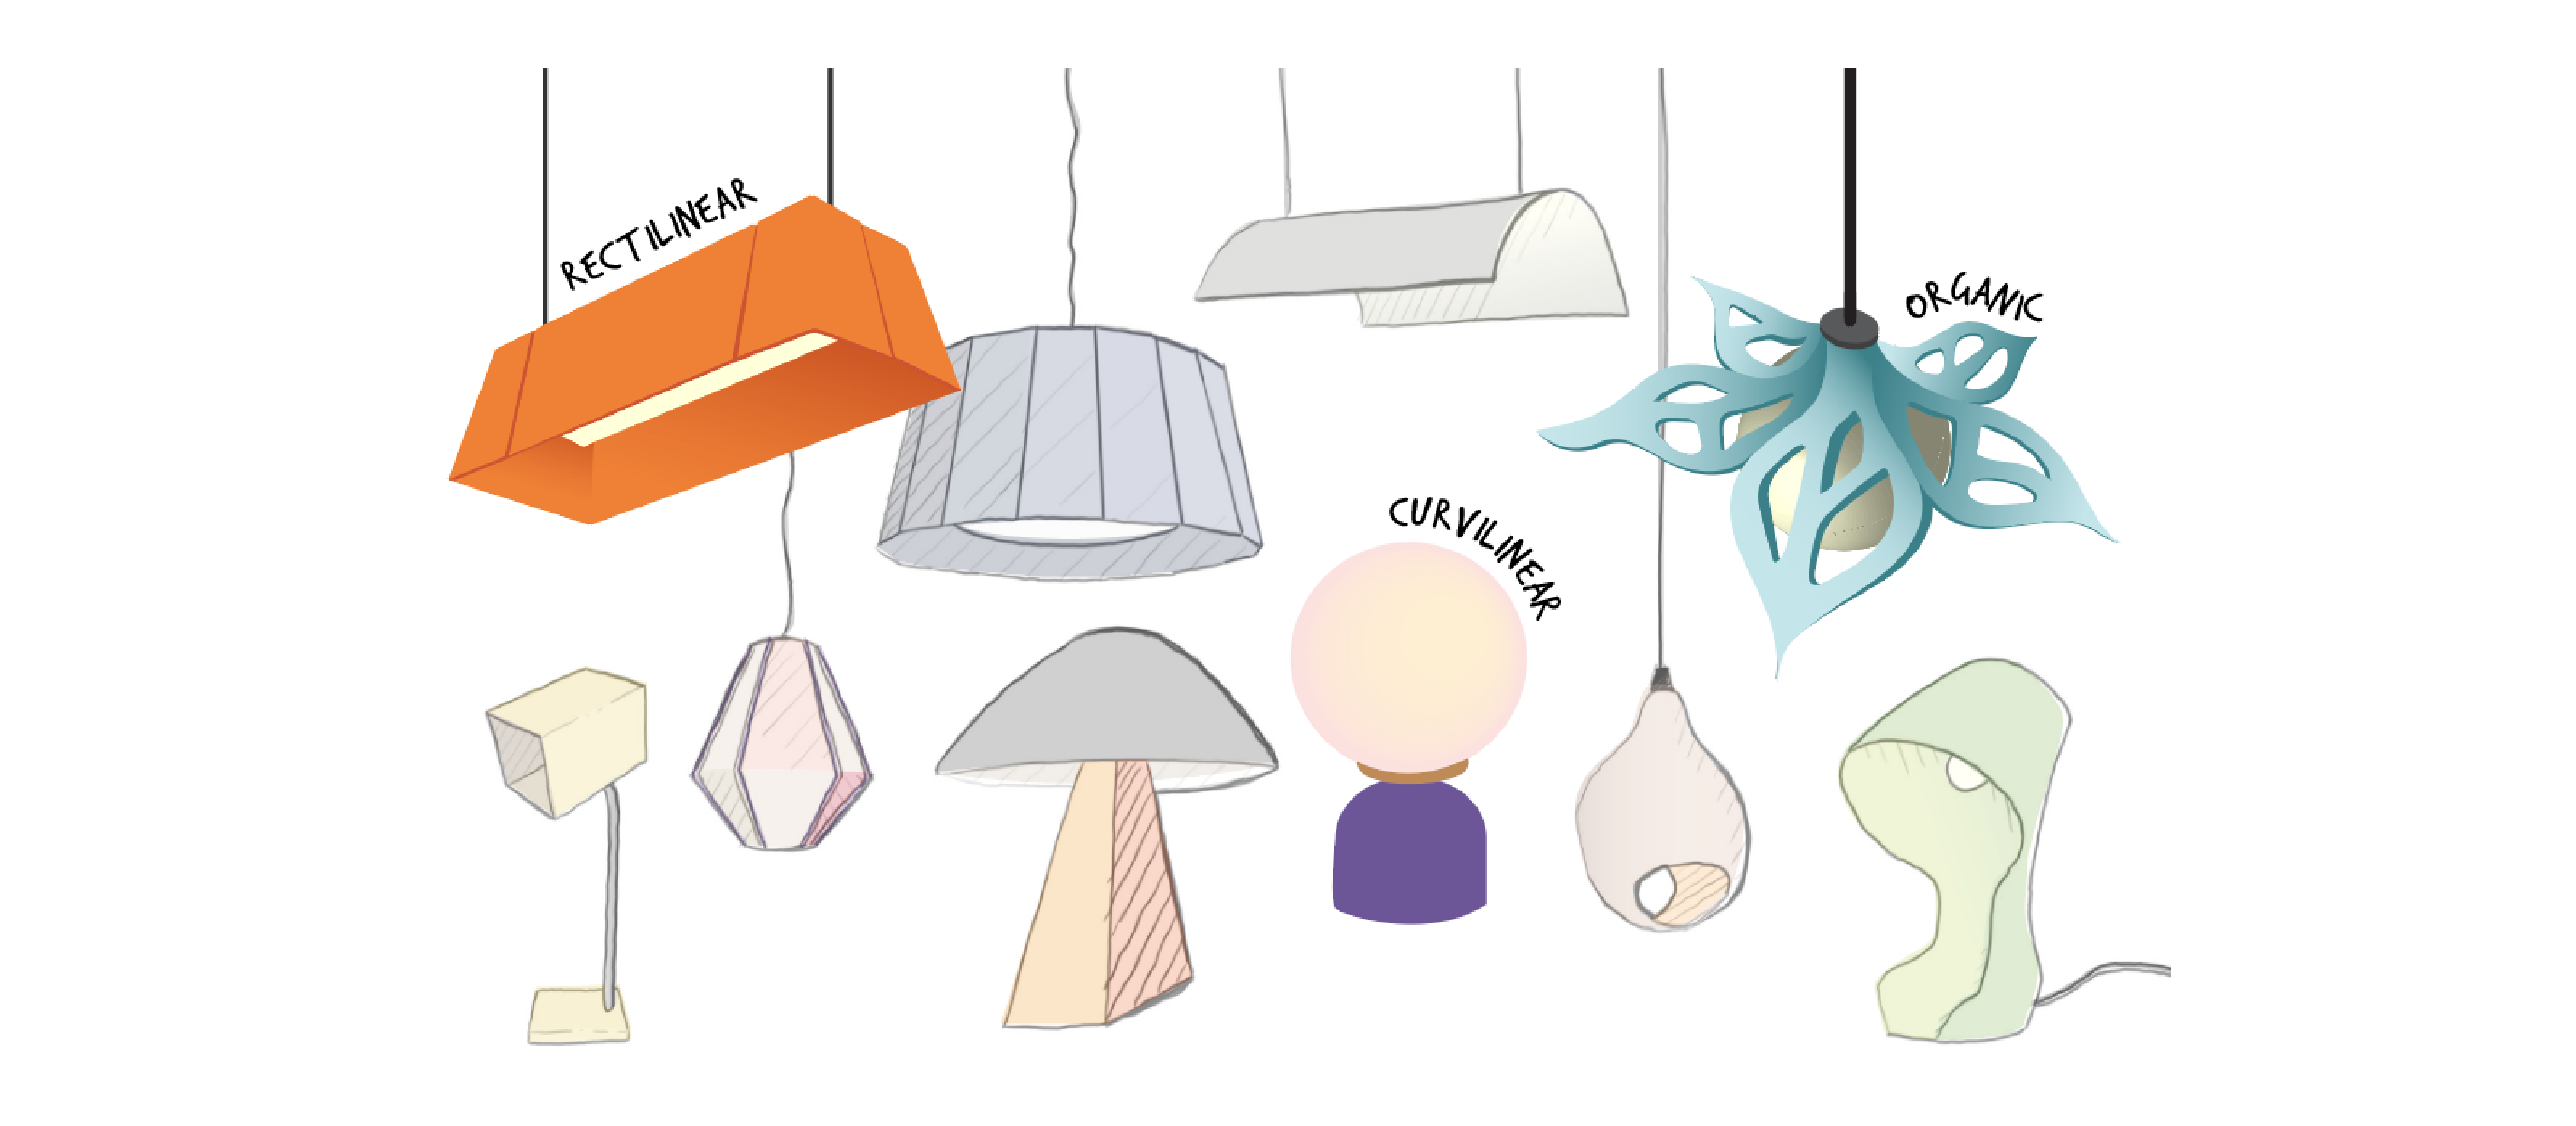 This image includes 10 designs of lamps, where each one is different than the other. The examples apply a combination of rectilinear, curvilinear, and organic elements in unique compositions.